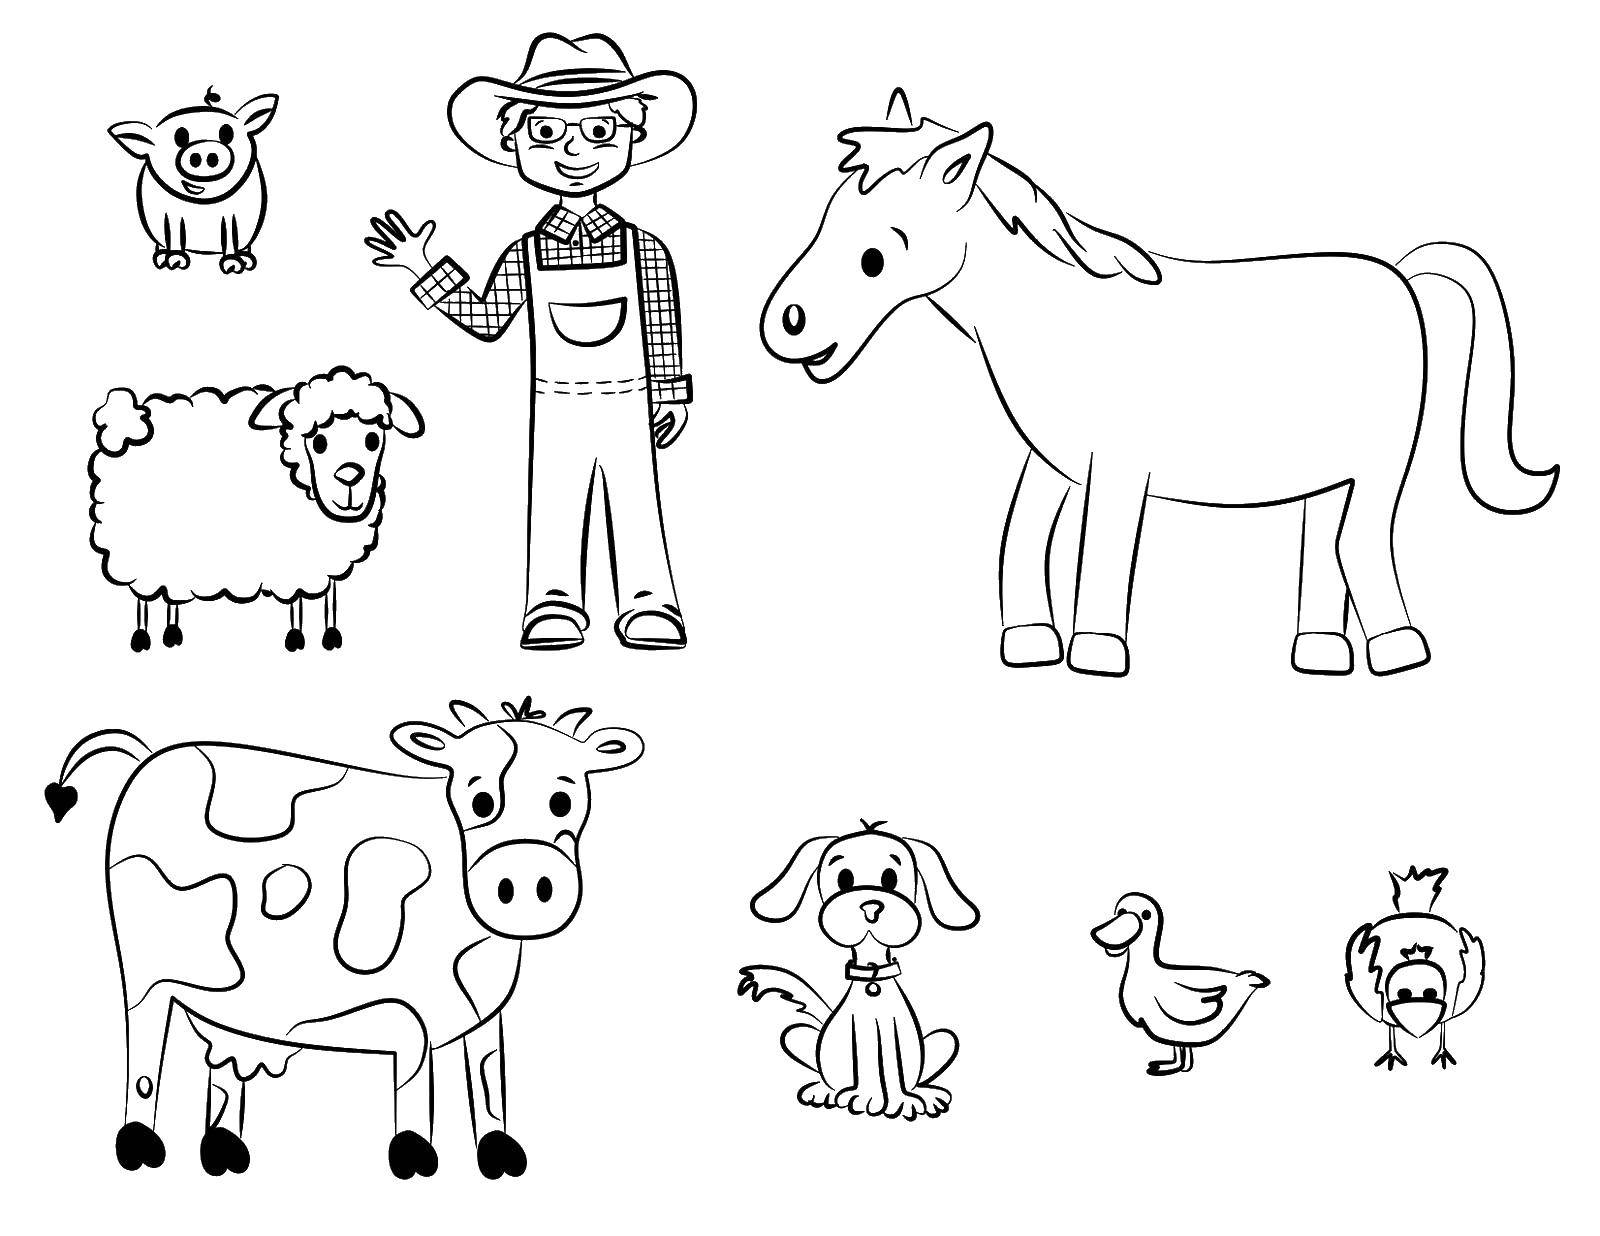 Coloring Farmer with animals. Category animals. Tags:  the farmer, the animals.